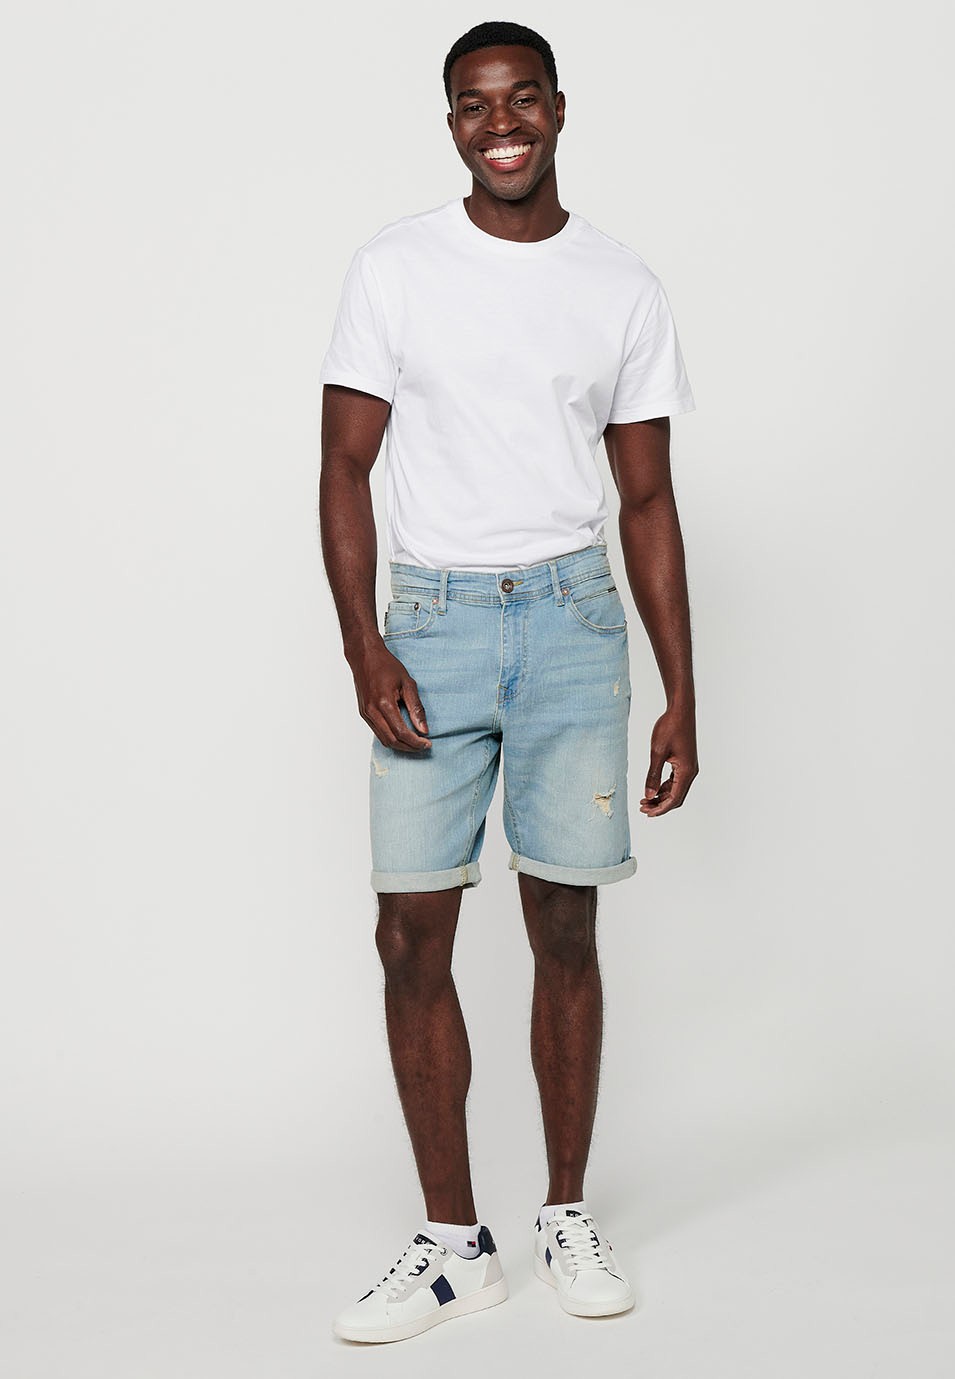 Shorts with turn-up finish and front closure with zipper and button and five pockets, one blue pocket pocket for men